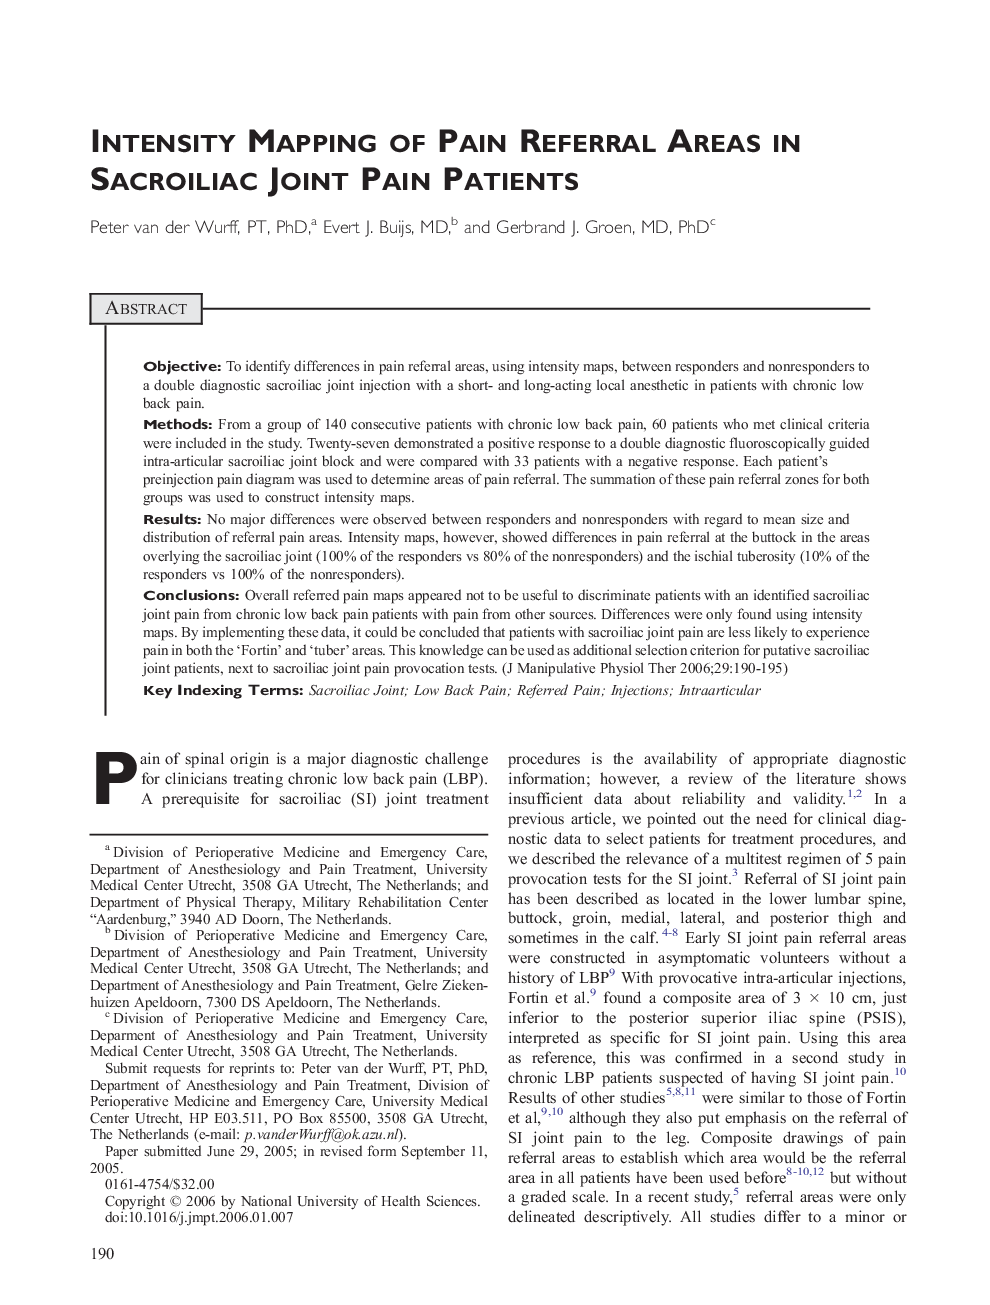 Intensity mapping of pain referral areas in sacroiliac joint pain patients